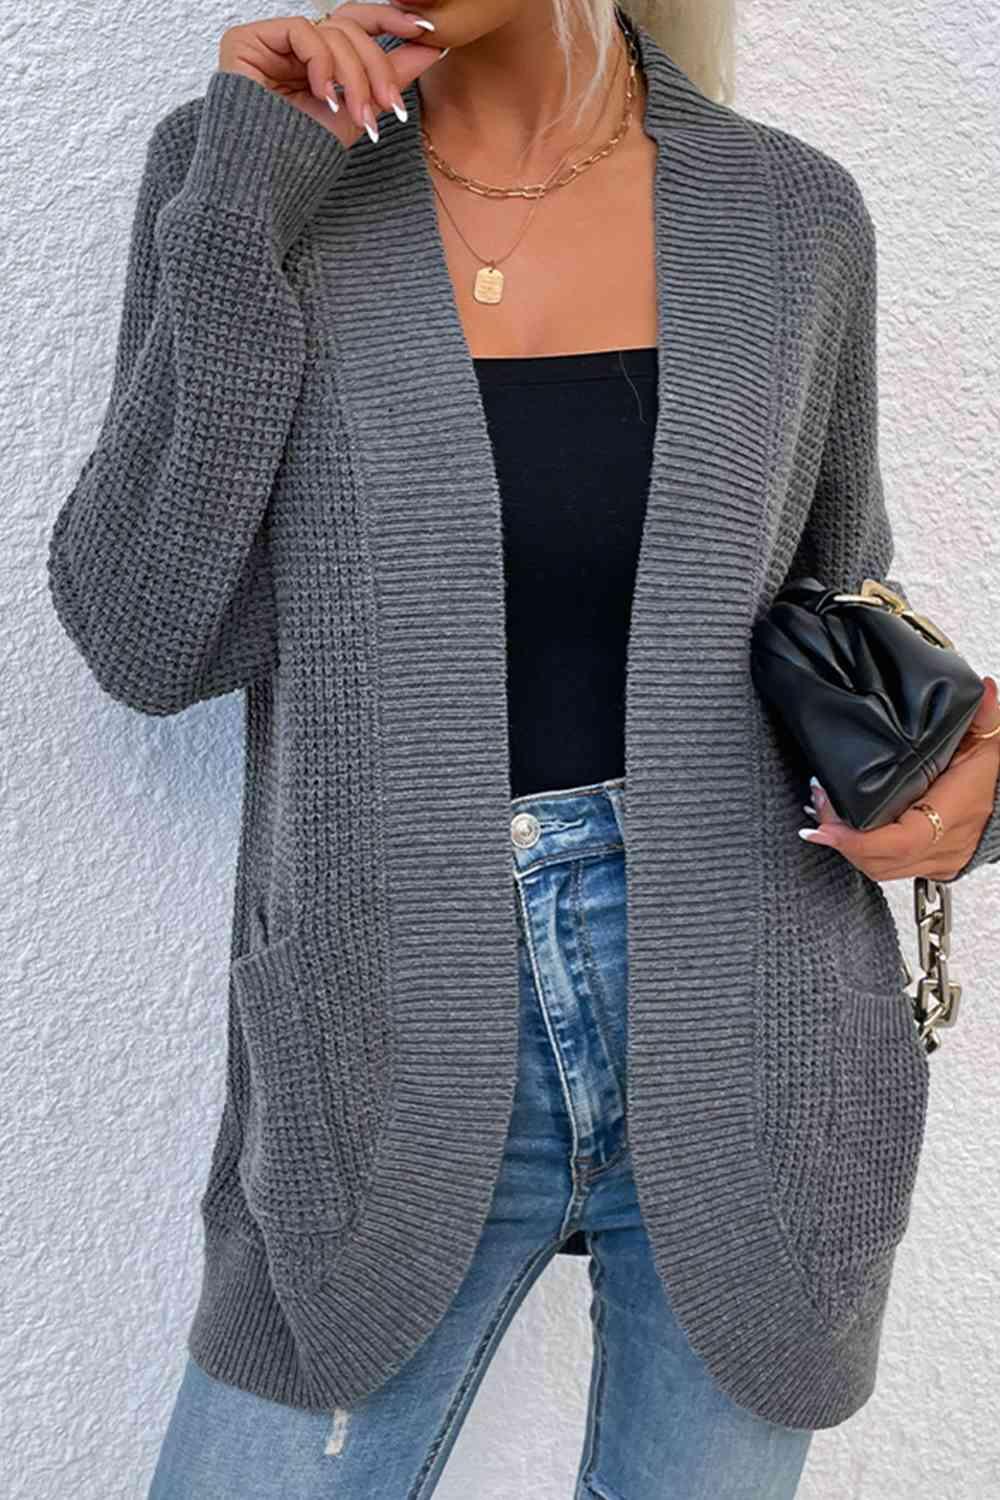 a woman smoking a cigarette while wearing a gray cardigan